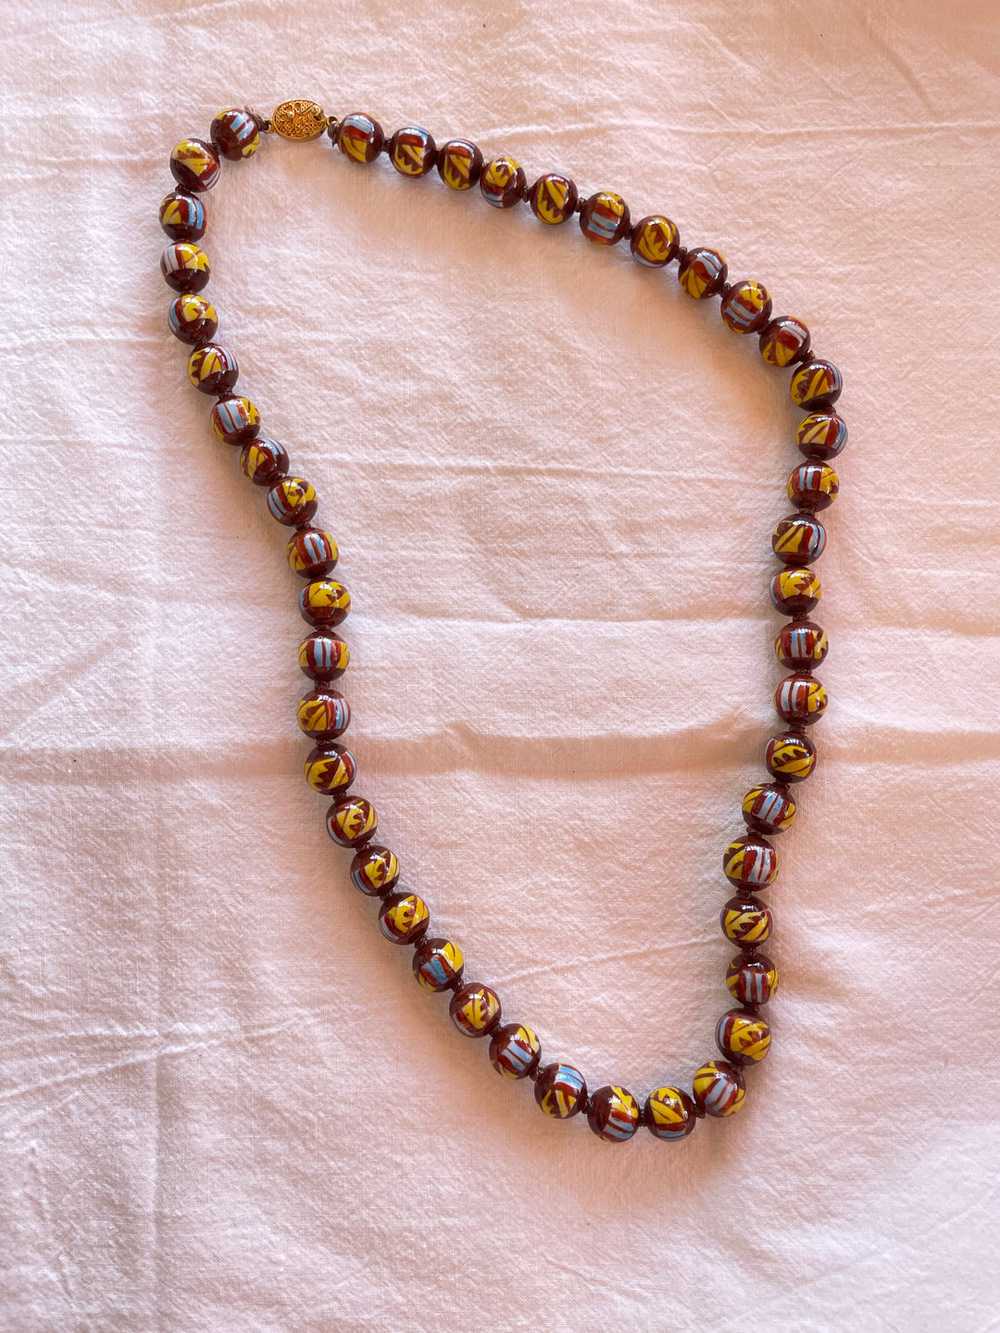 Vintage Painted Glass Bead Necklace in Cinnamon C… - image 2